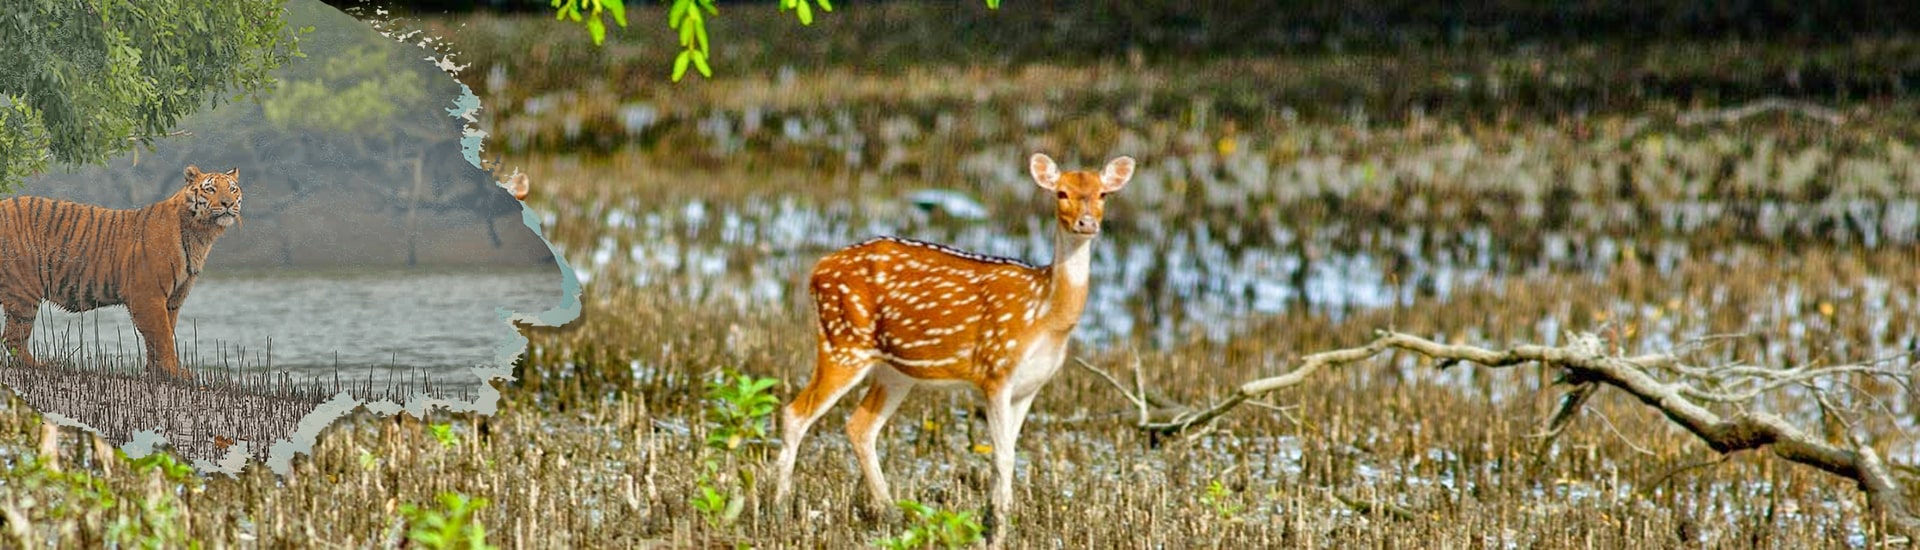 How to get refreshed in Enchanting Sundarban